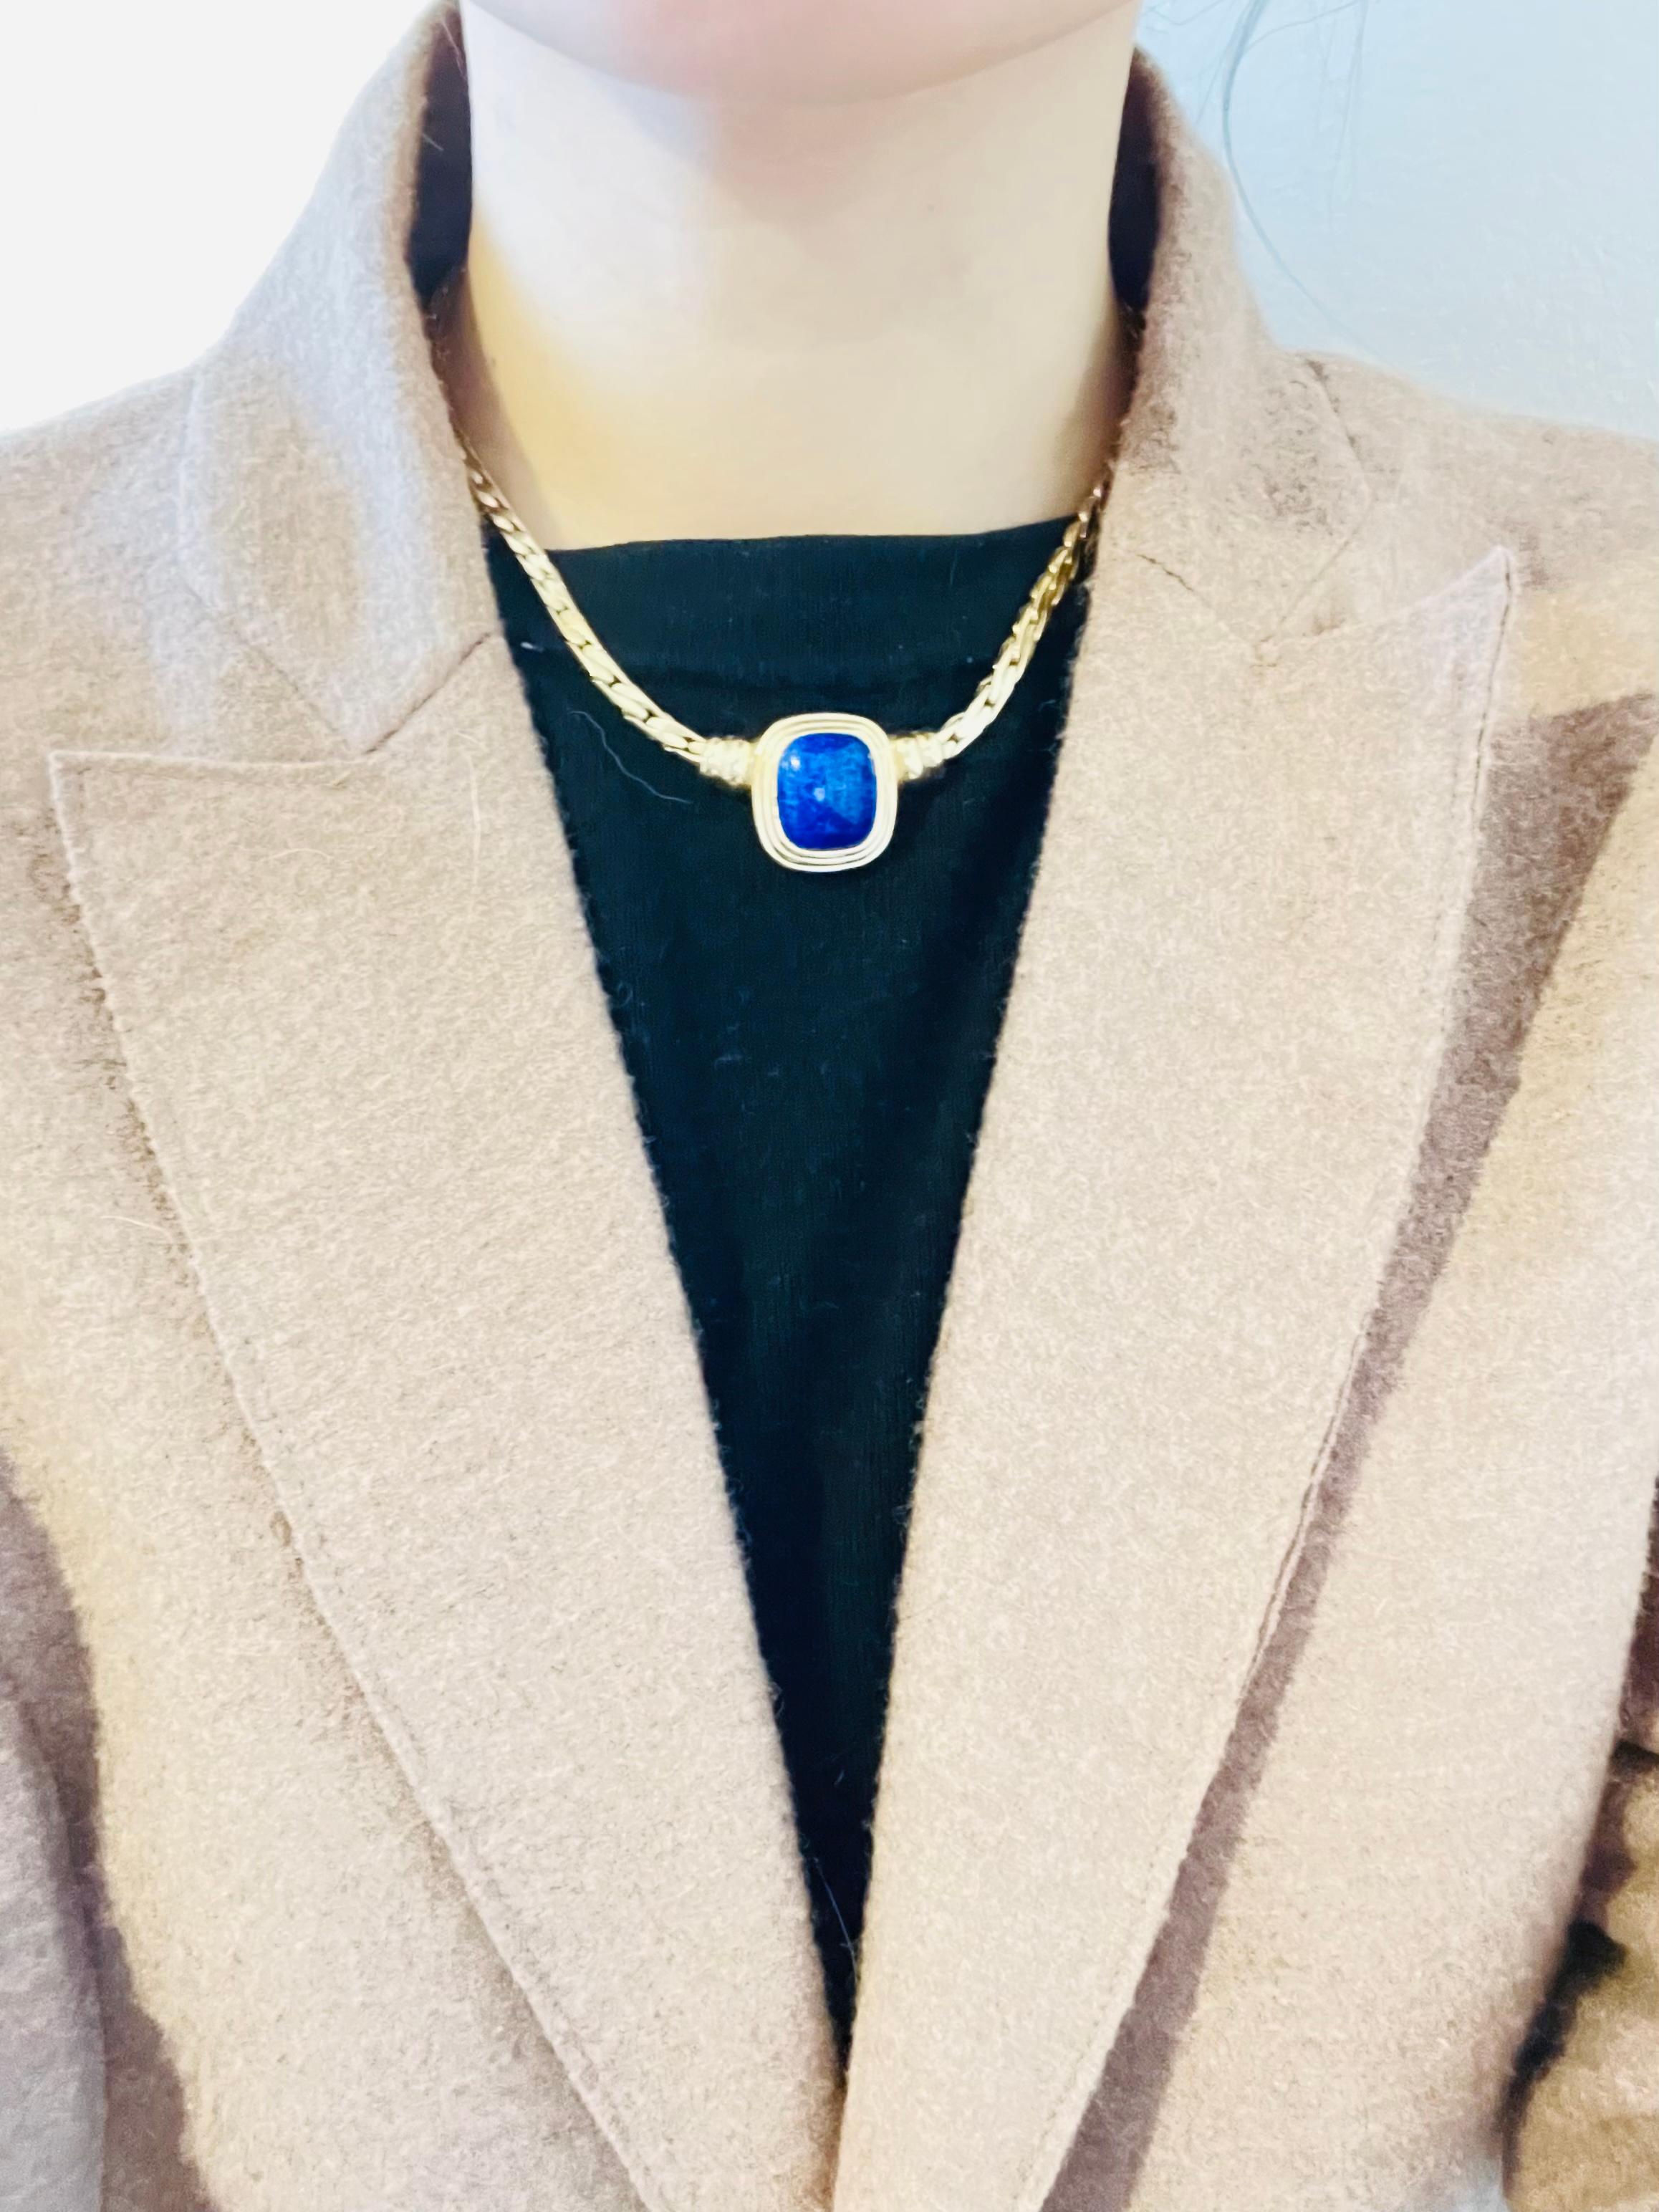 Christian Dior Vintage 1980s Navy Lapis Cabochon Rectangle Pendant Gold Necklace In Excellent Condition For Sale In Wokingham, England